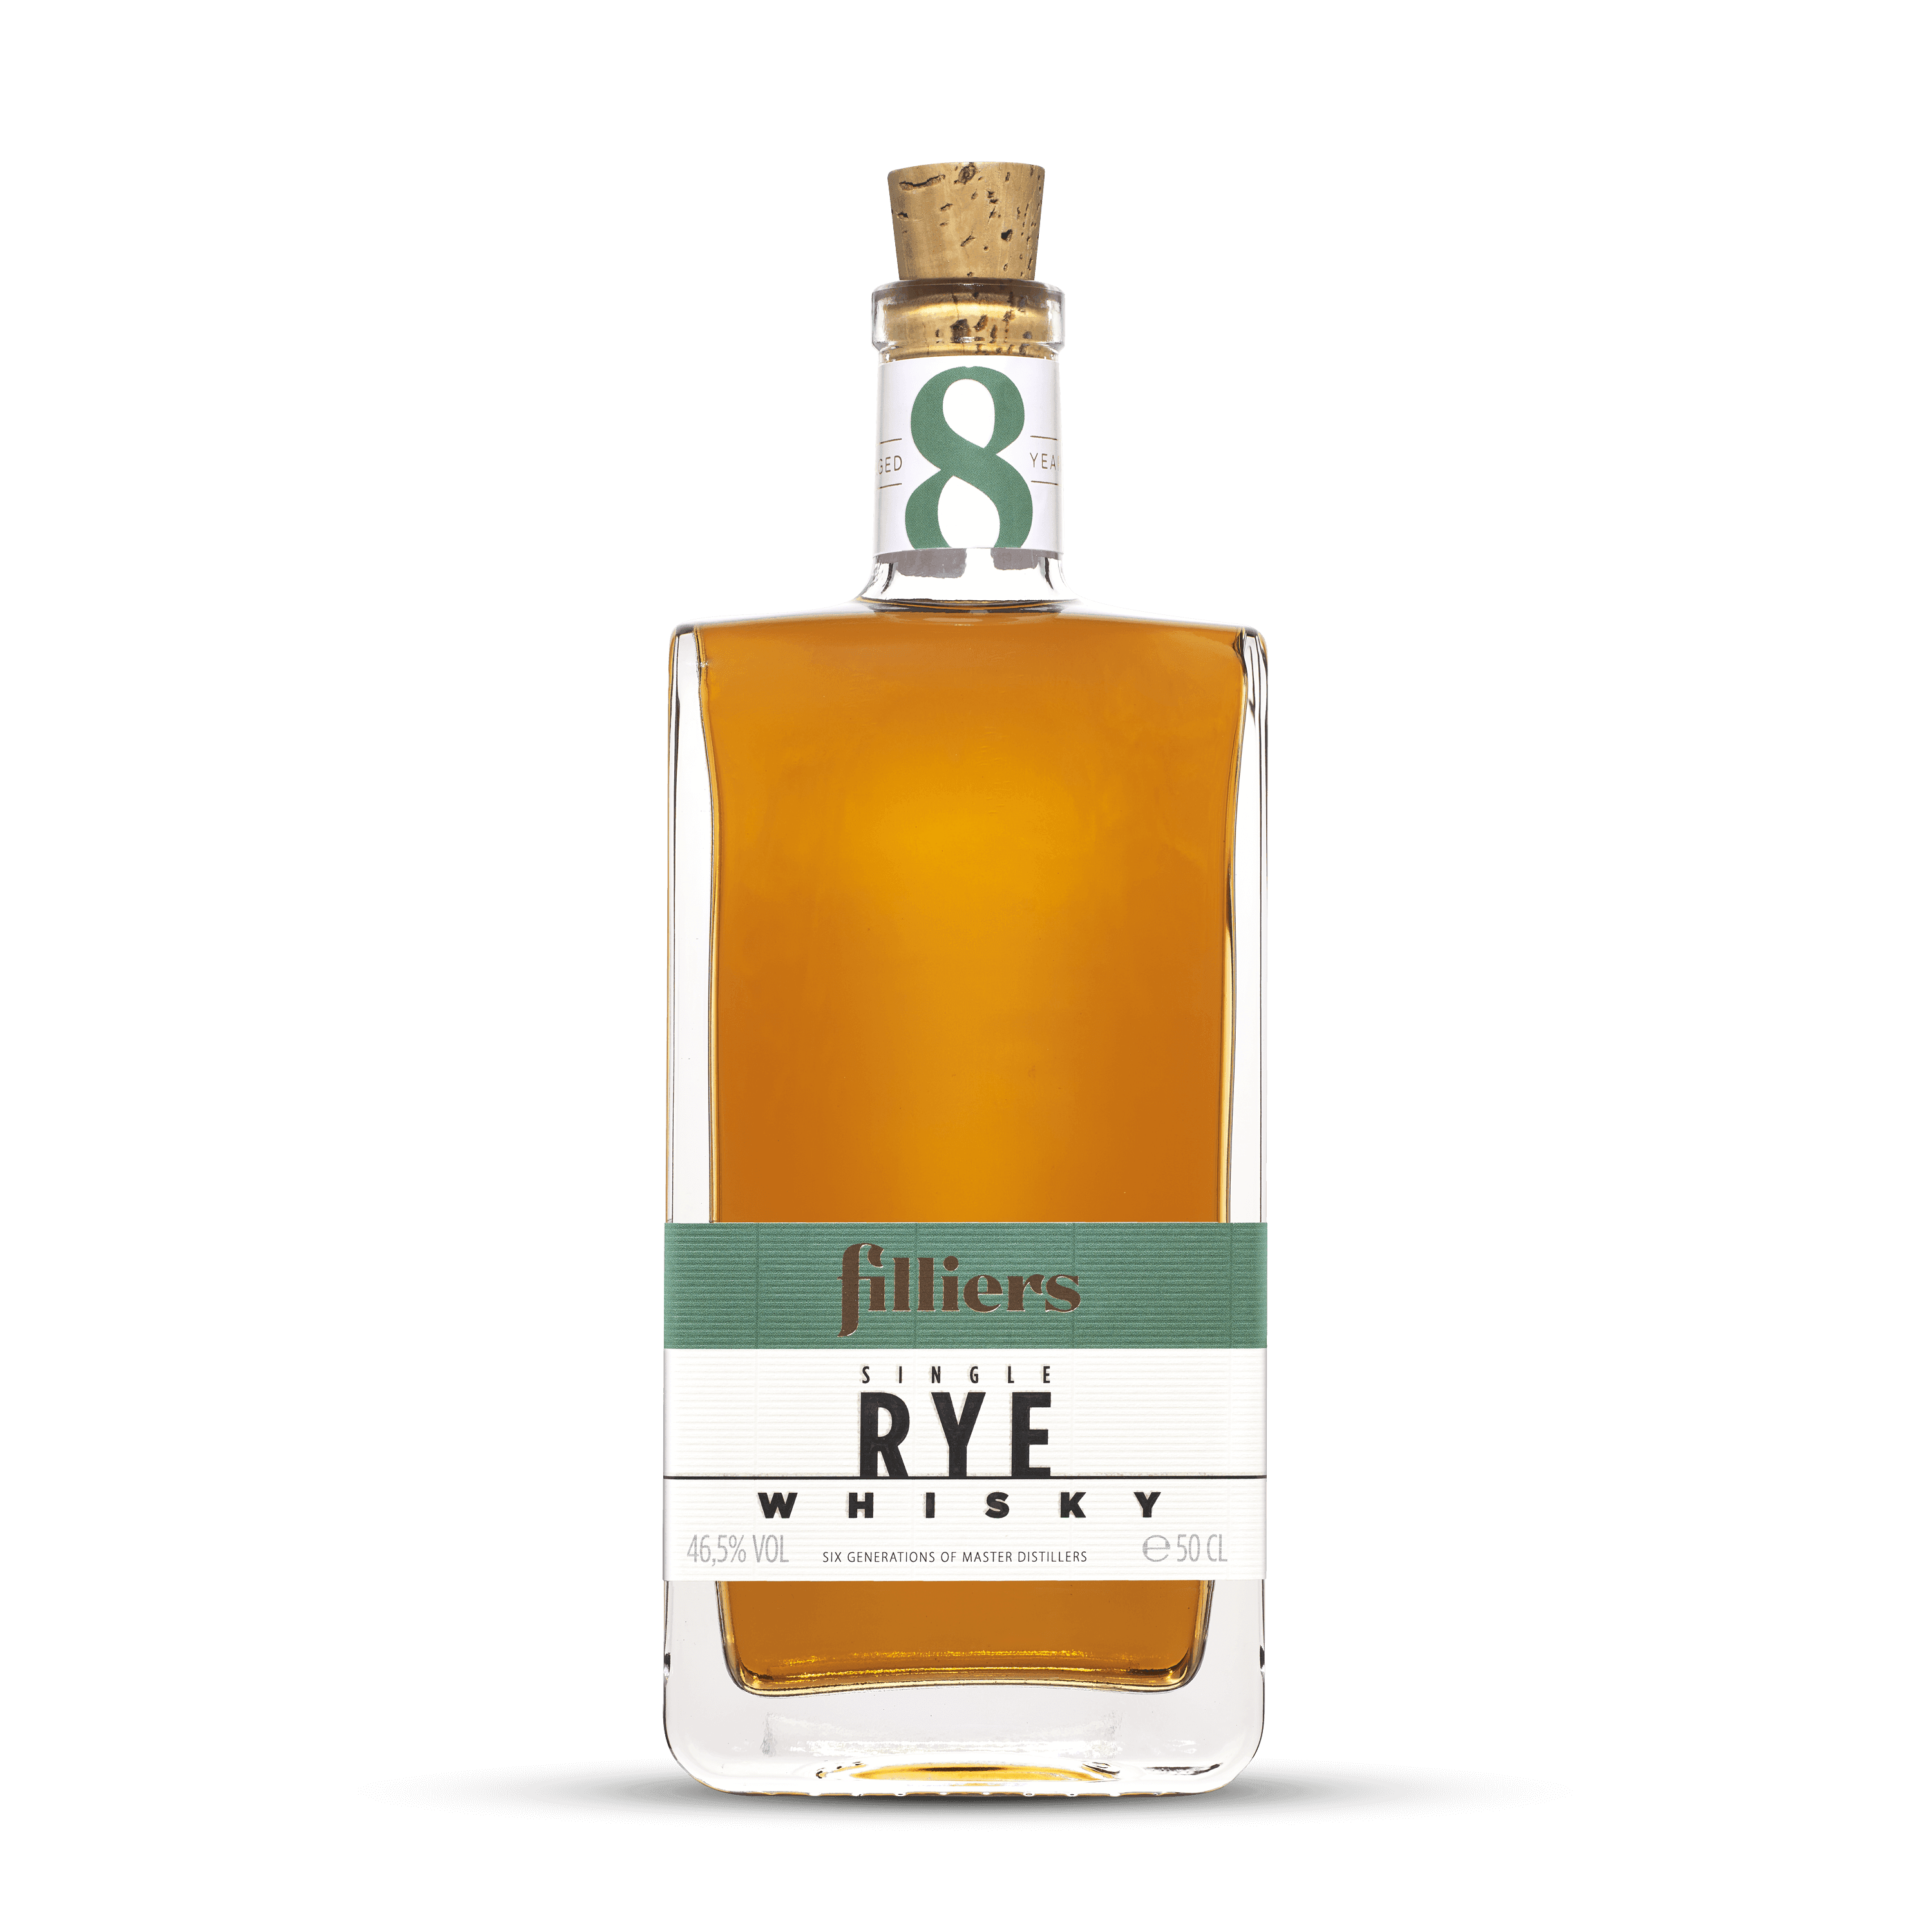 Filliers Single Rye Whisky 46,5% 8 Years Old 50Cl.